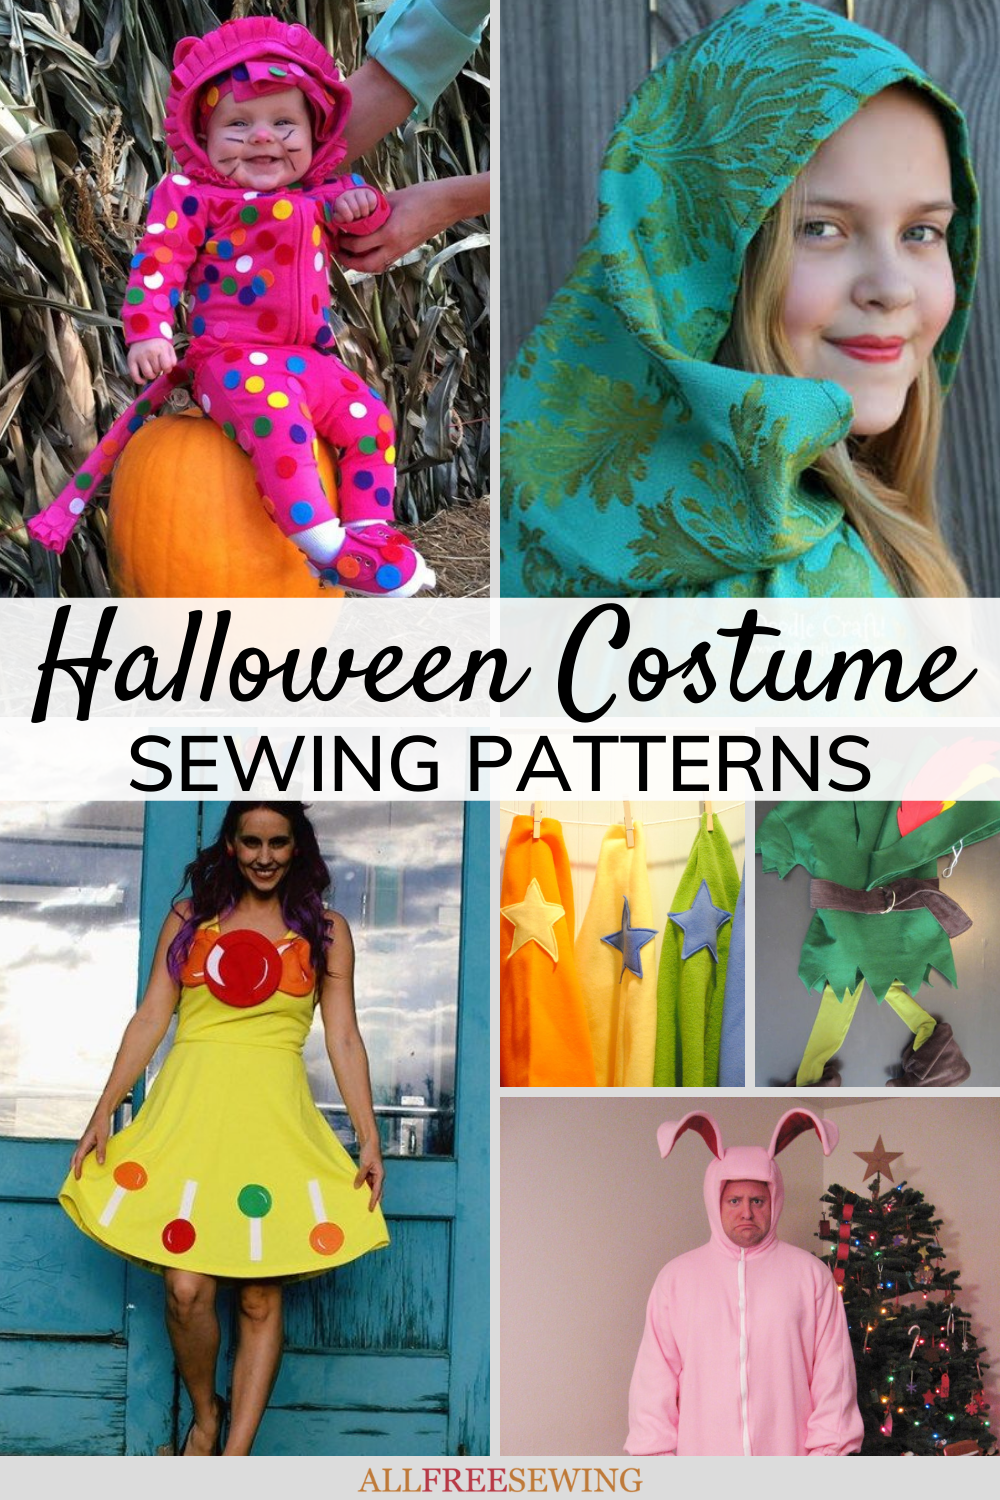 50+ Halloween Costume Sewing Patterns for the Family (Free!)